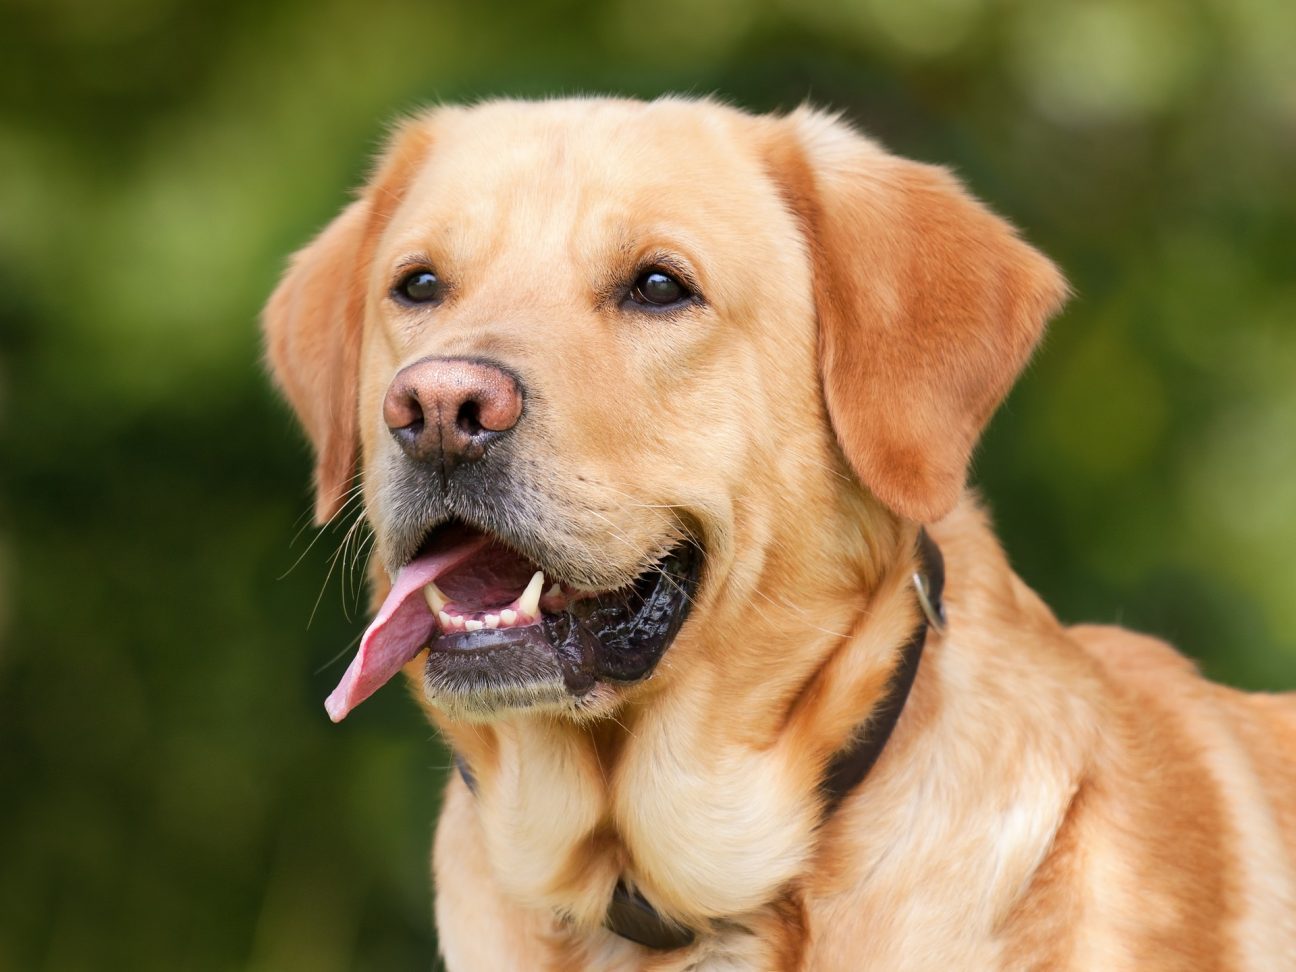 Dog Nasal Cancer Life Expectancy Without Treatment